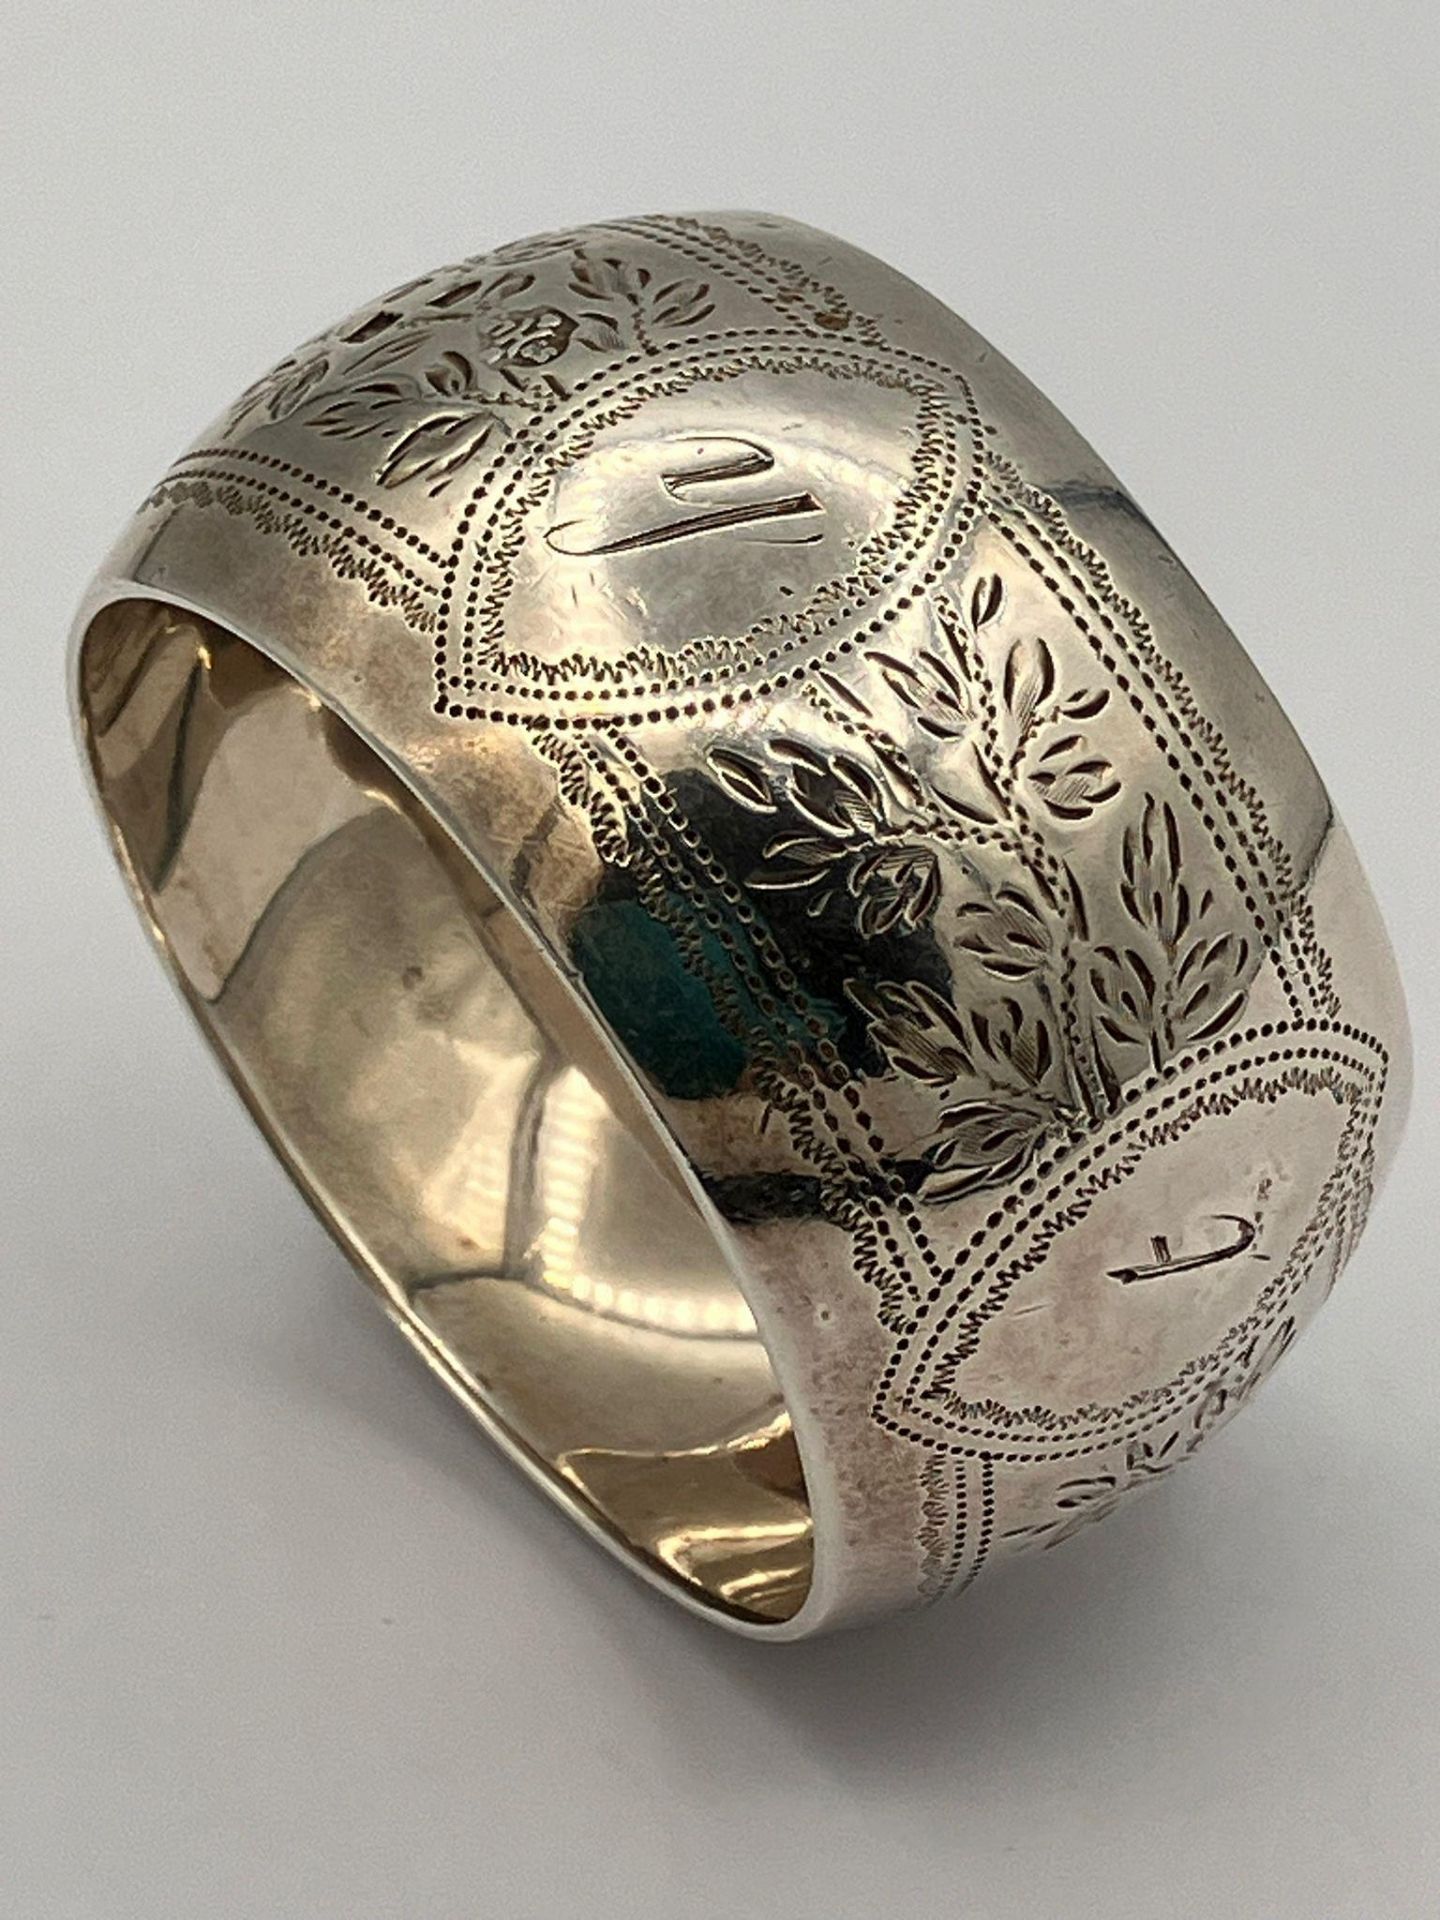 Antique SILVER SERVIETTE RING. Having clear hallmark for William Hutton. London 1896. Beautifully - Image 4 of 4